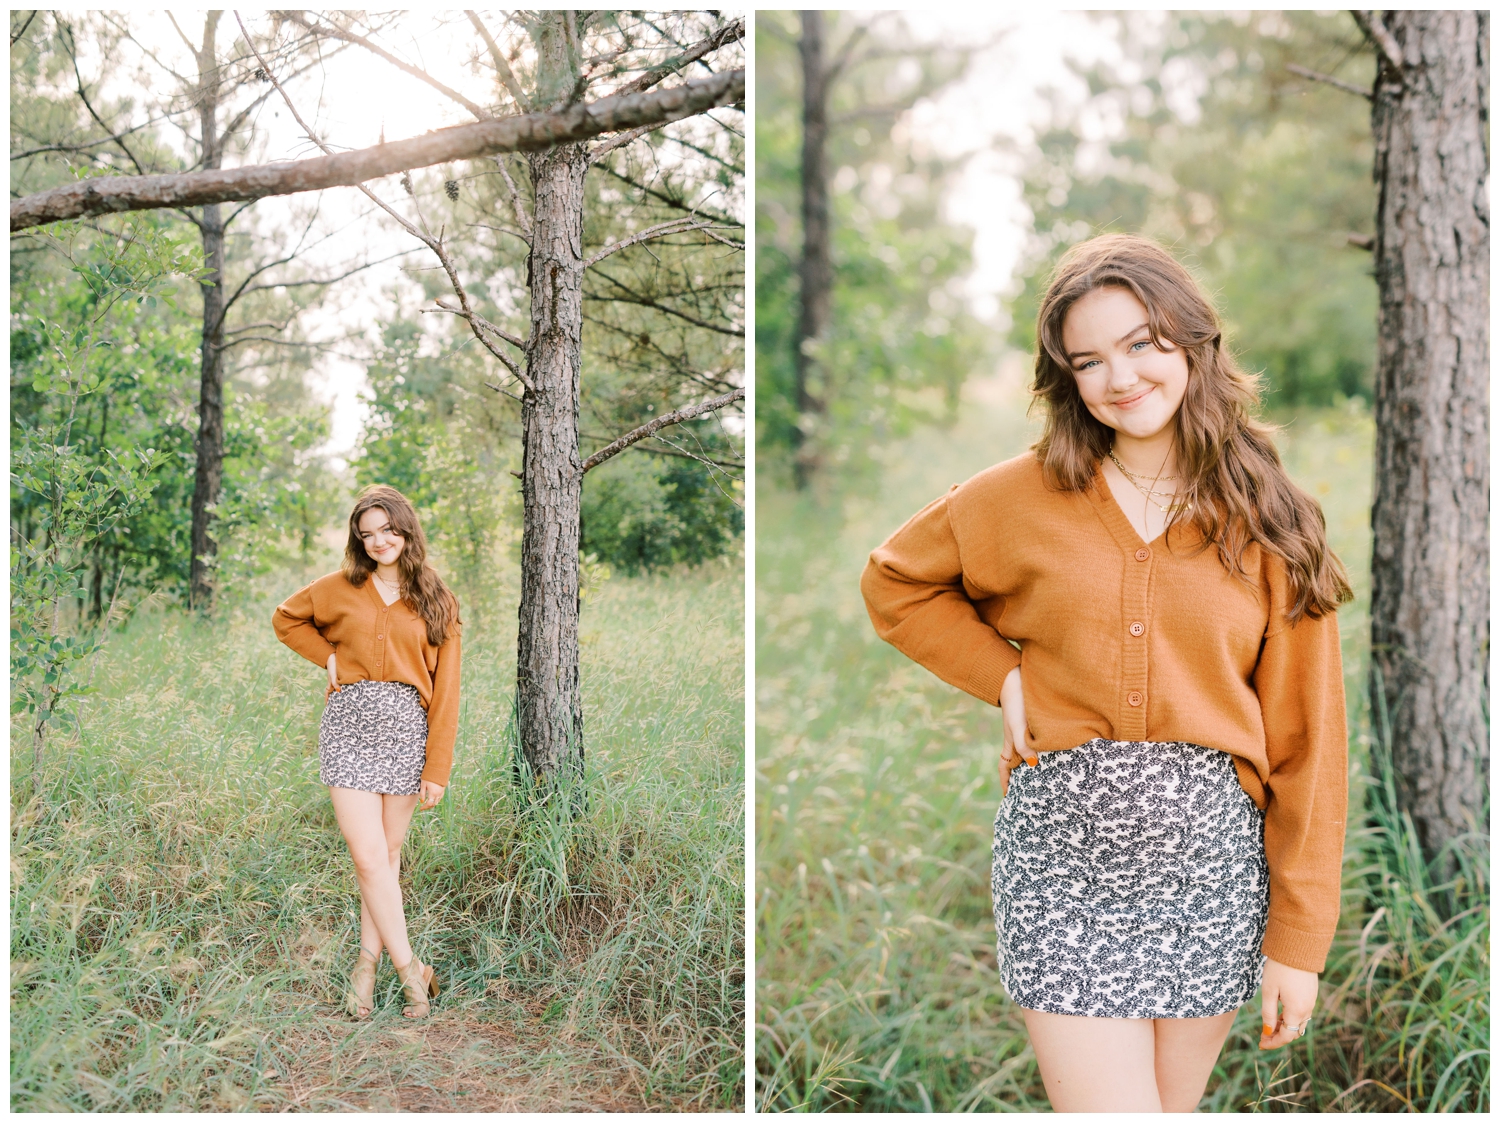 Outdoor Houston Senior portrait session with girl posing in a field